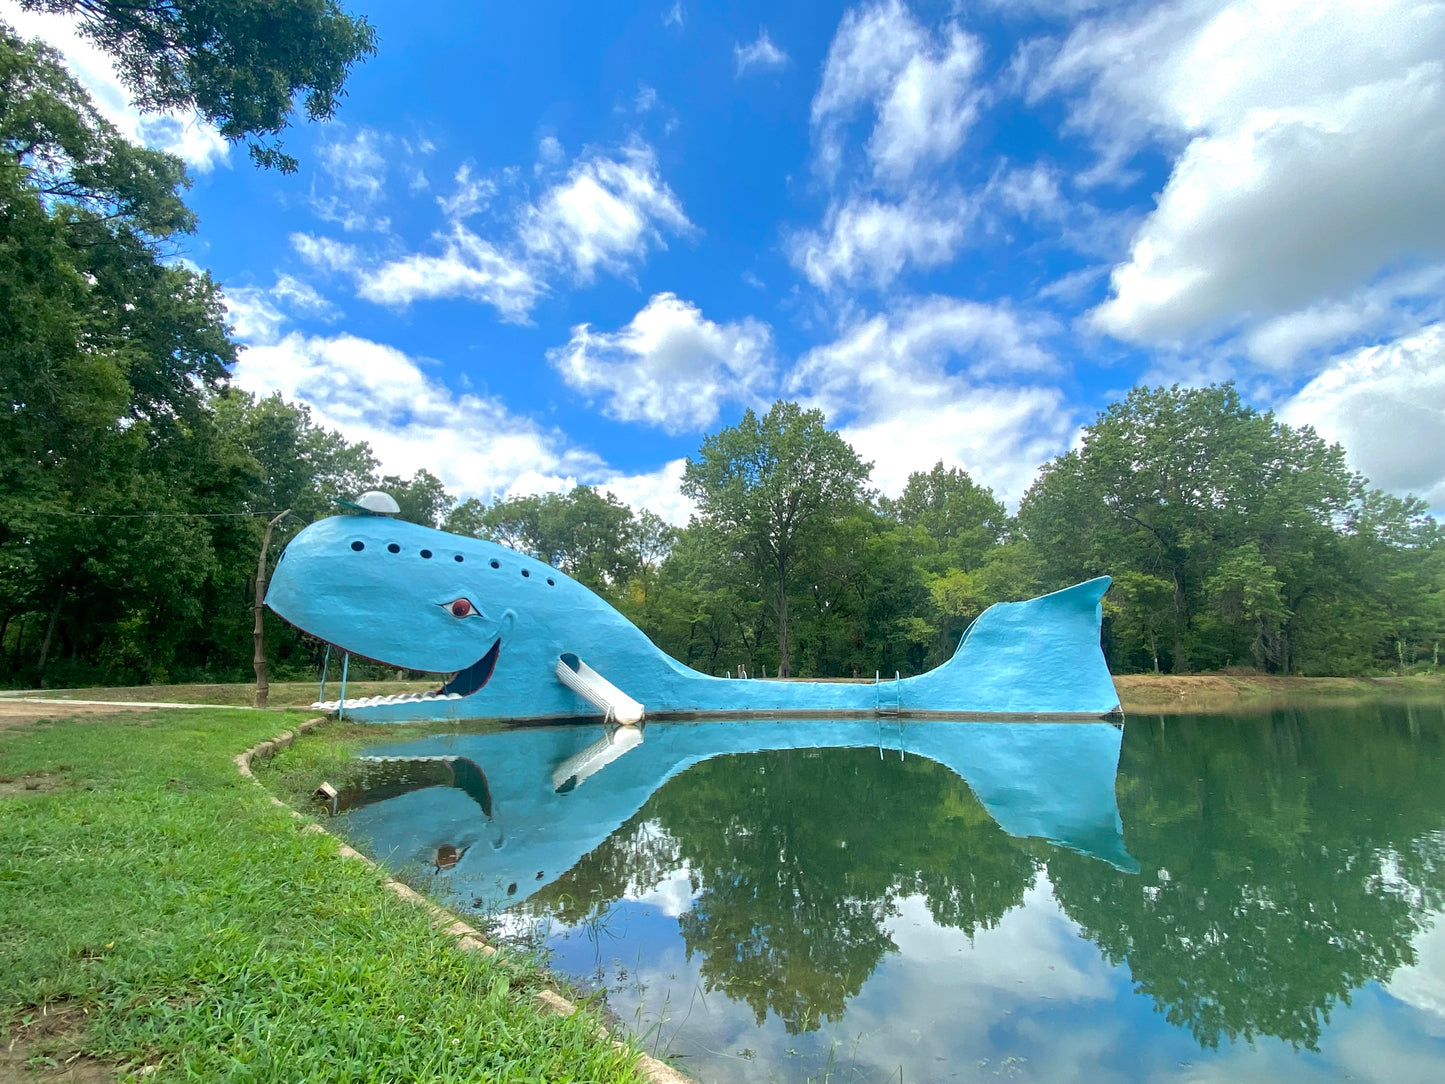 The Blue Whale of Catoosa, Oklahoma Route 66 photographic print